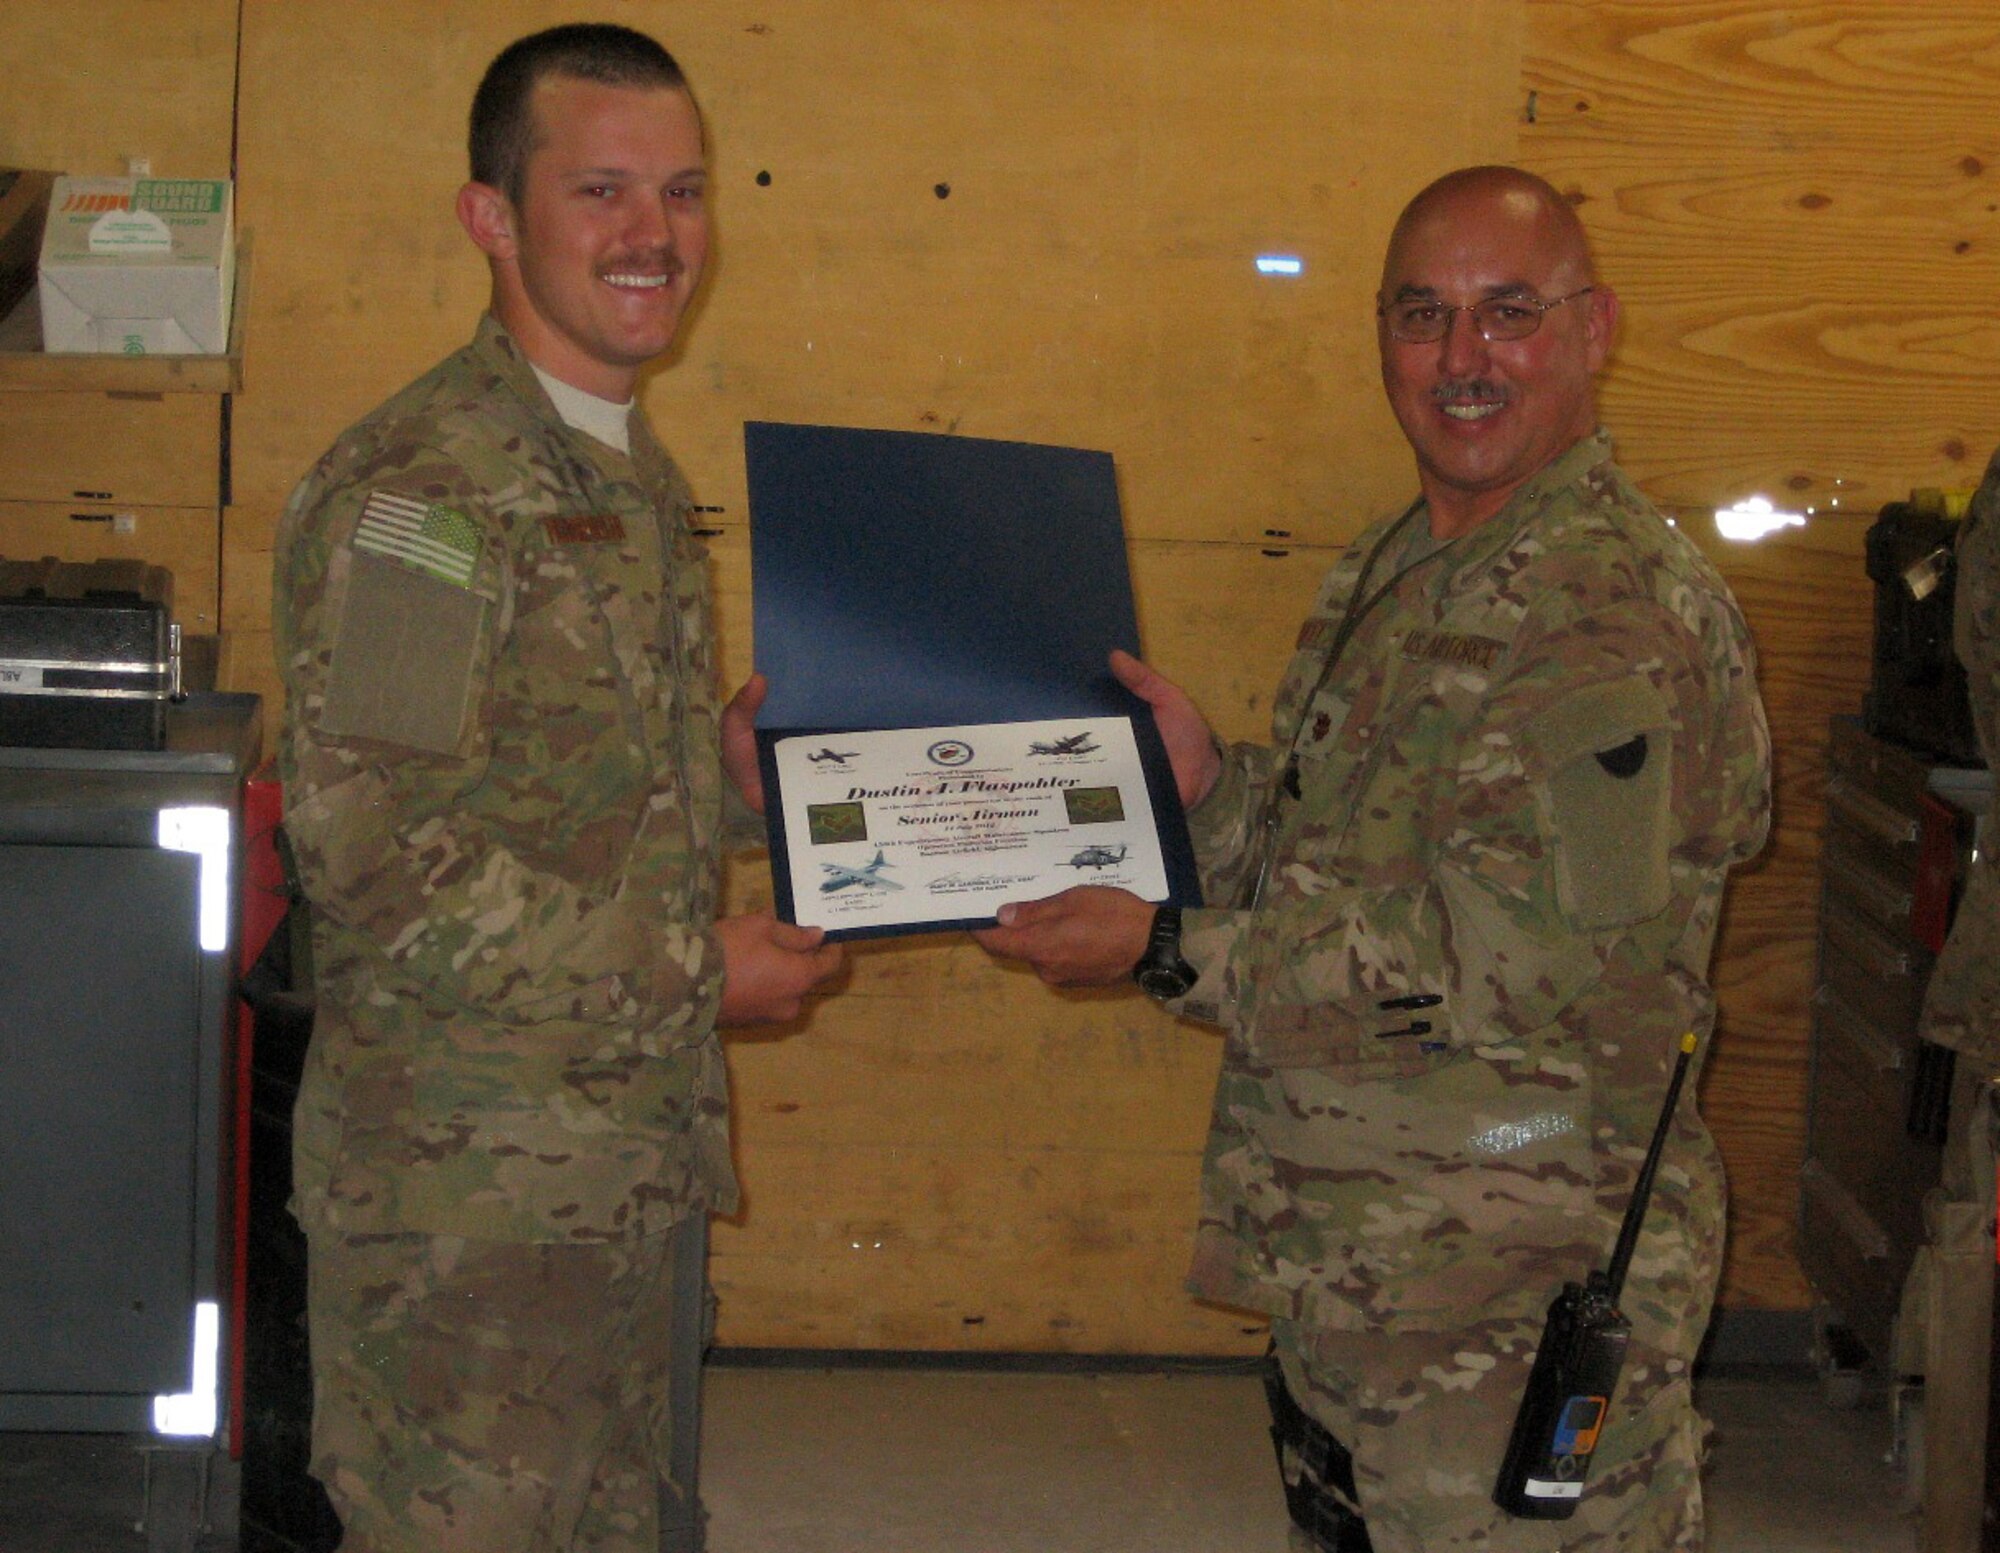 Senior Airman Dustin Flaspohler, left, receives a promotion certificate from Maj. John Easley at Bagram Airfield, Afghanistan. Both are members of the 188th Fighter Wing, which has approximately 375 Airmen currently deployed to Afghanistan in support of Operation Enduring Freedom. (Courtesy photo)